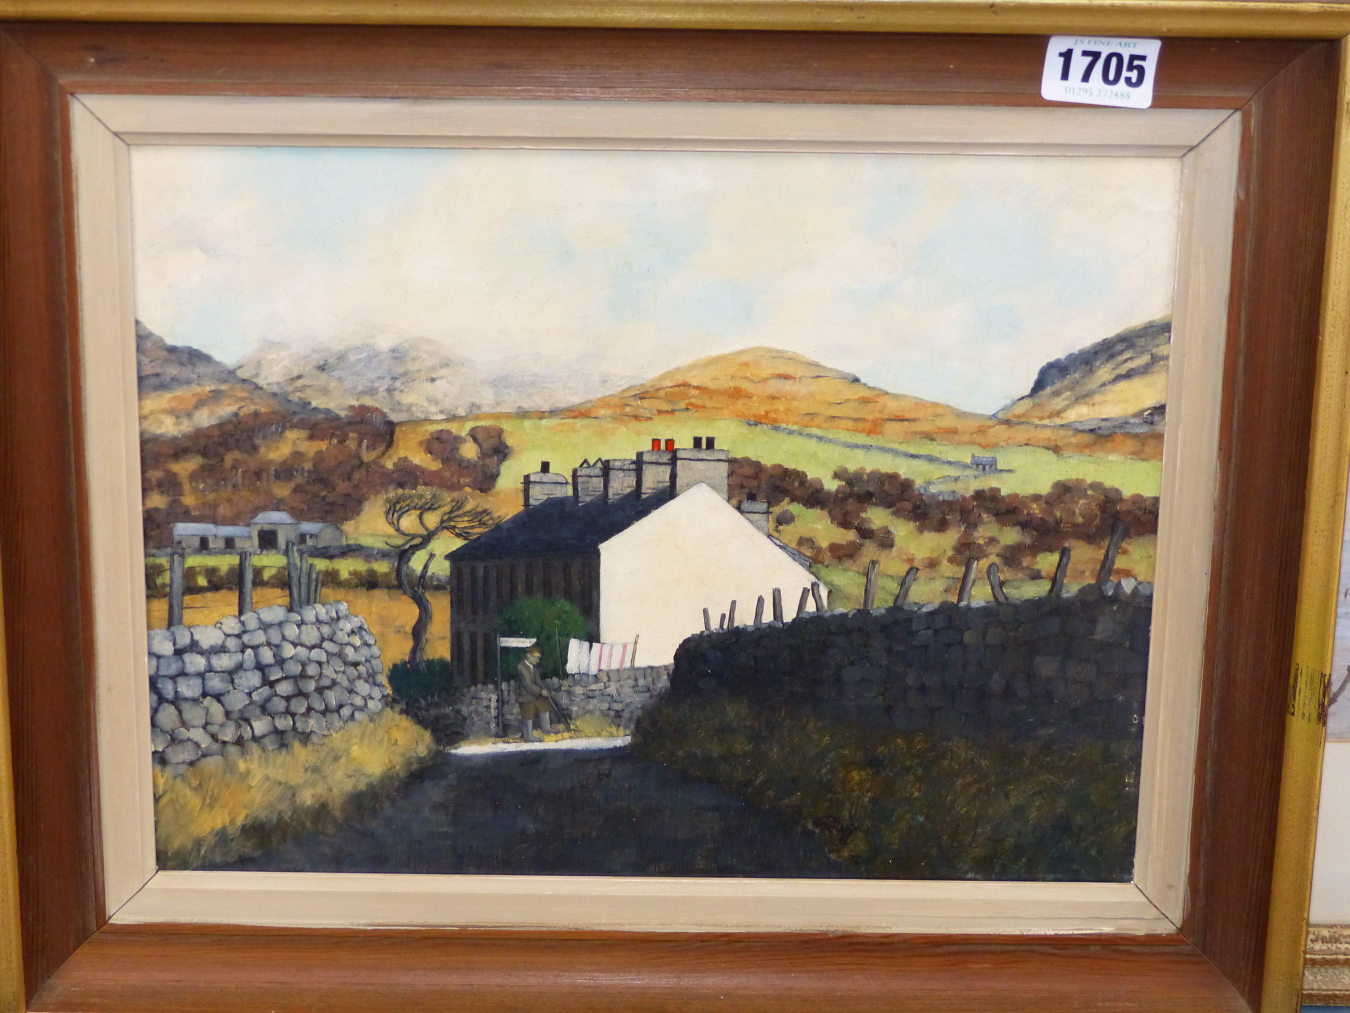 CHRISTOPHER COMPTON HALL, BRITISH 1930-2016. CWMYSTRADLLYN WELSH VILLAGE SCENE BEFORE MOUNTAINS. OIL - Image 2 of 5